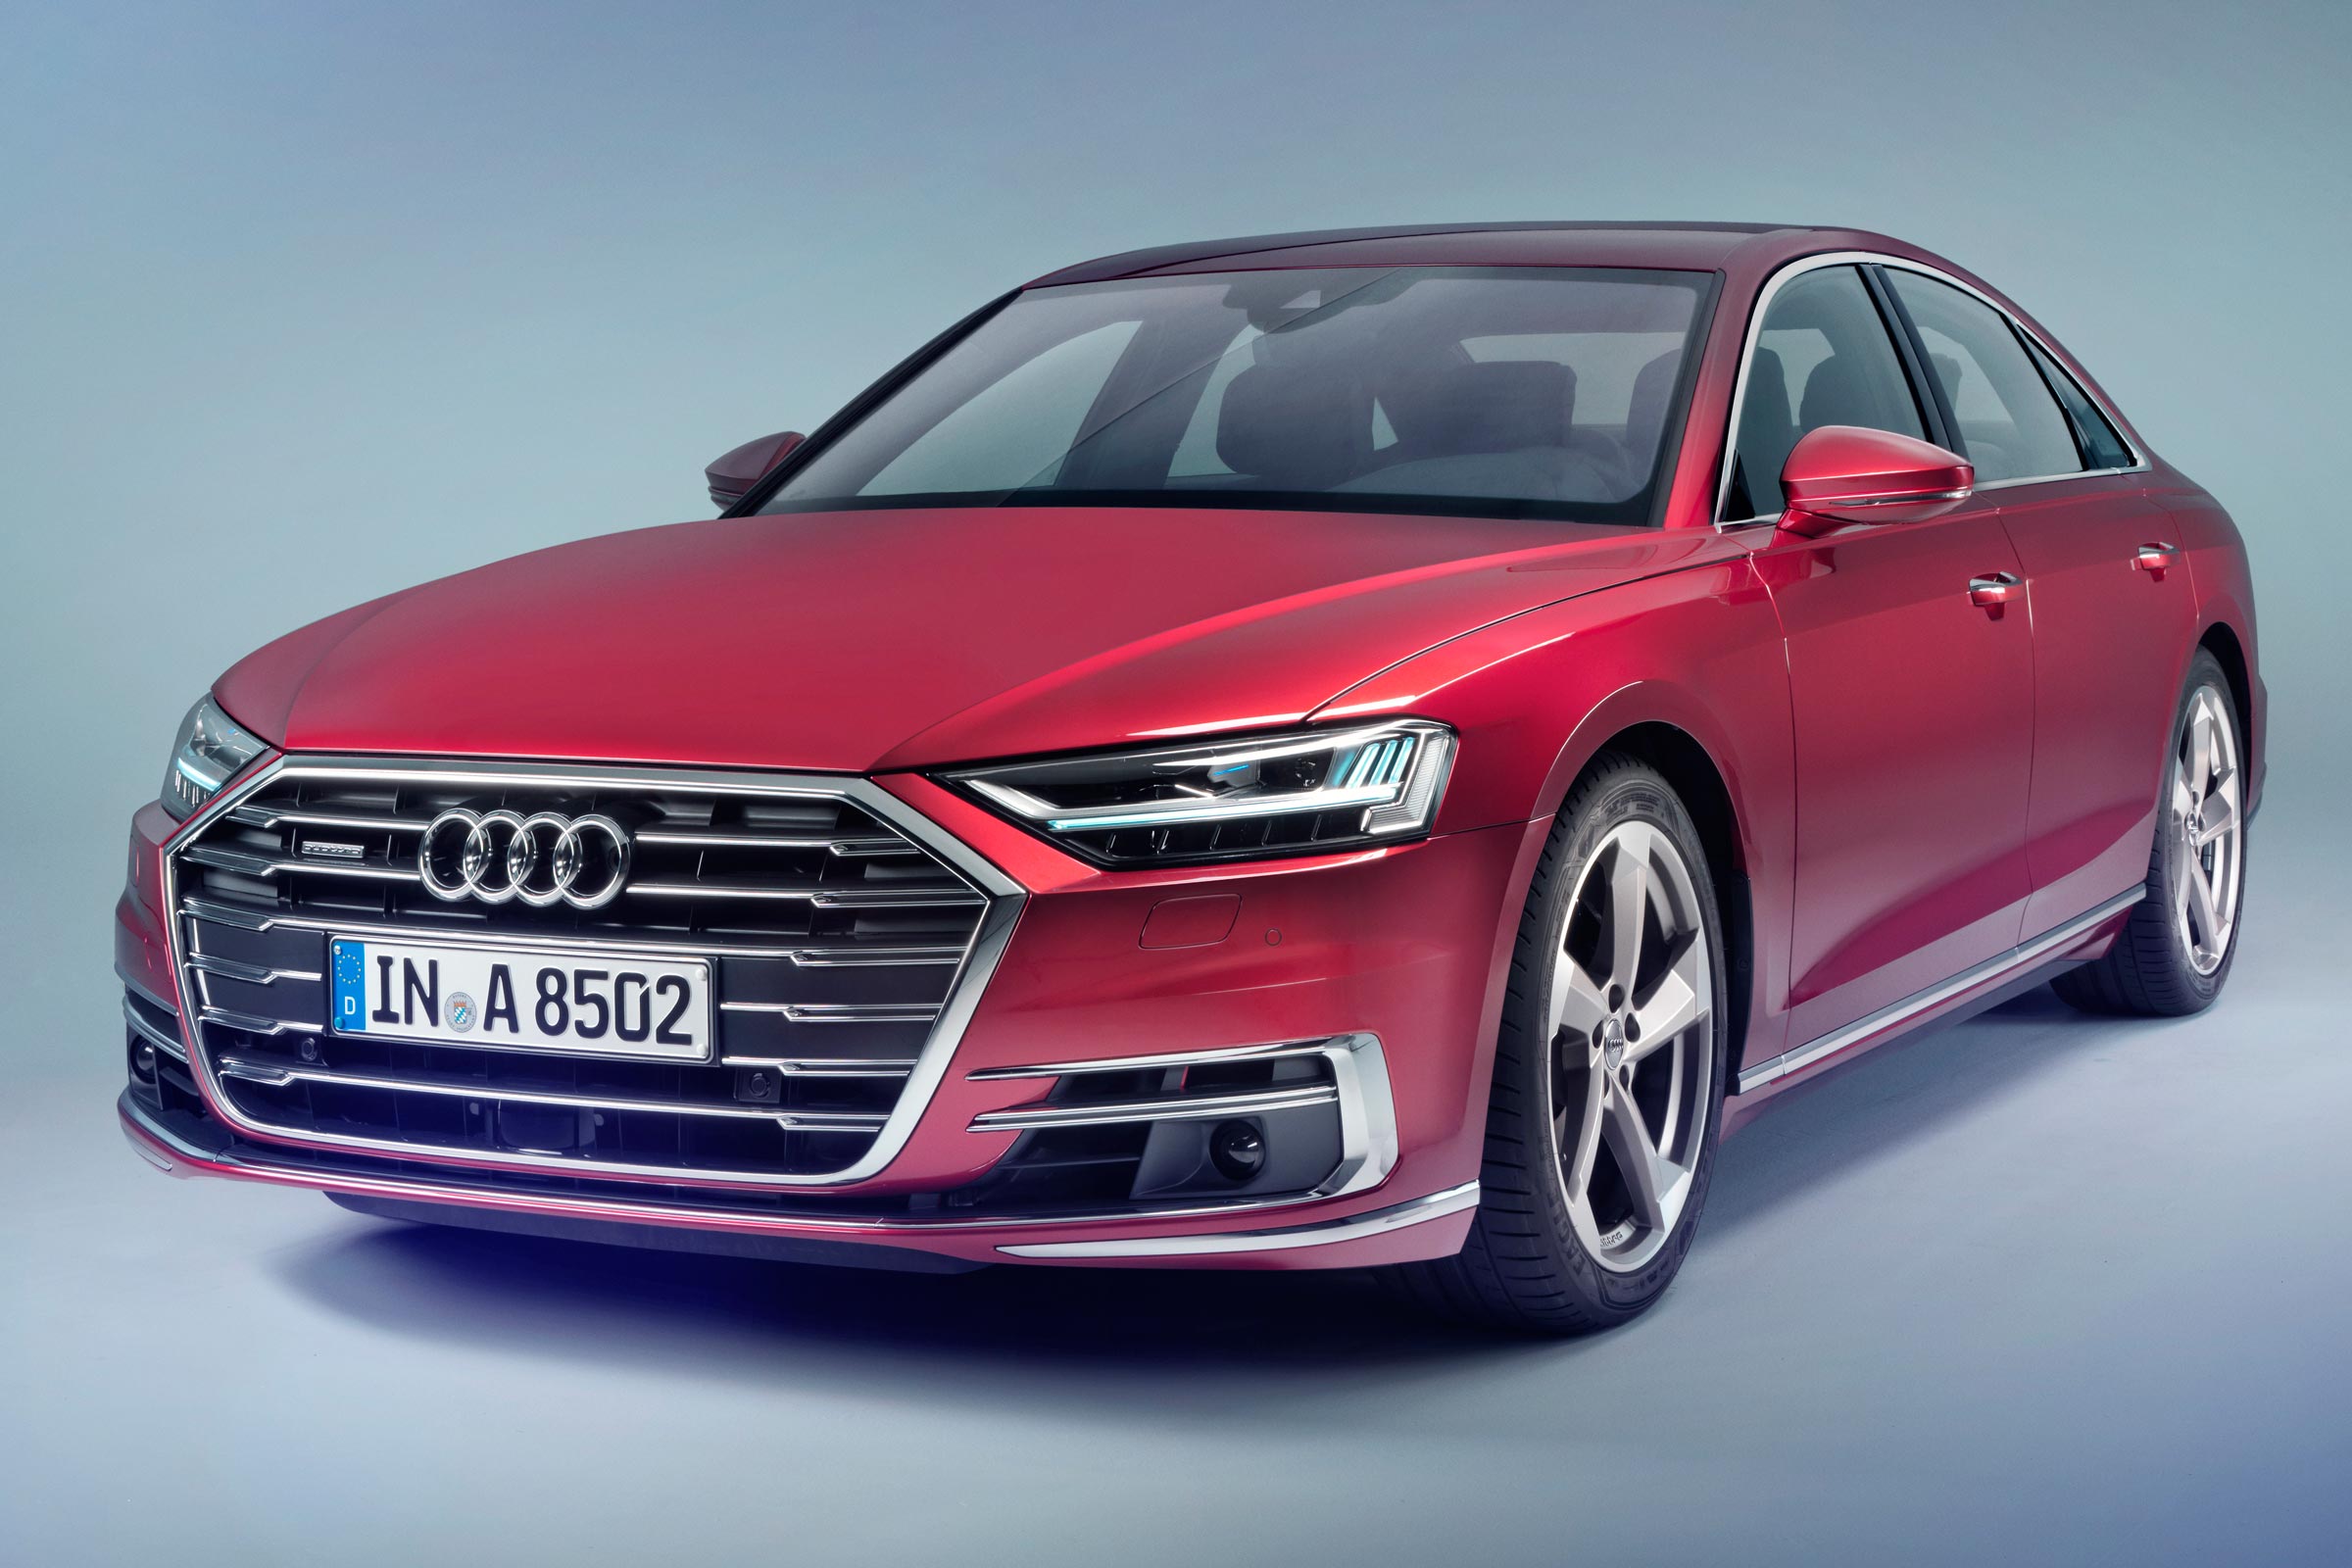 New 2018 Audi A8 Prices Specs And Release Date Carbuyer